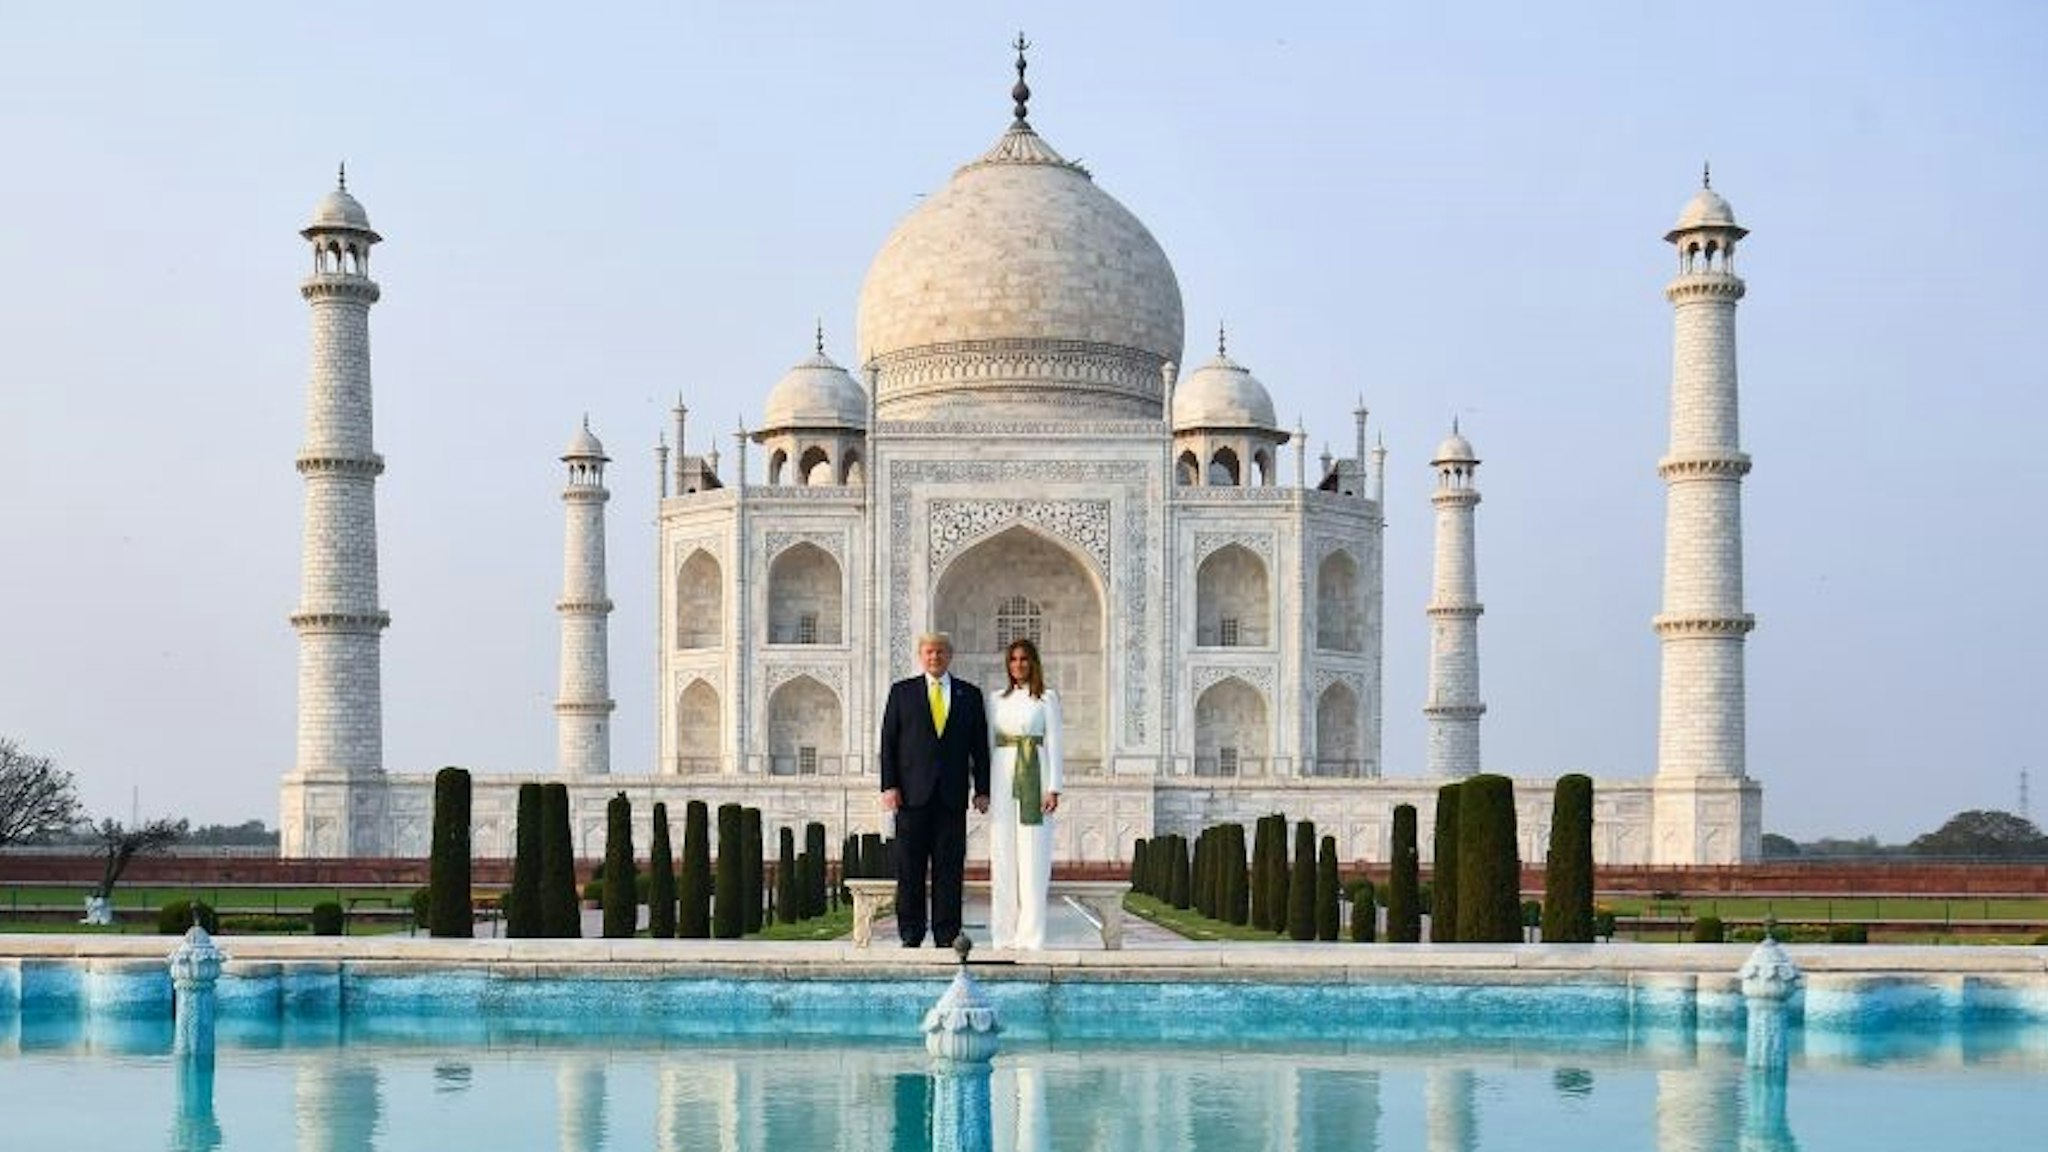 US President Donald Trump and First Lady Melania Trump pose as they visit the Taj Mahal in Agra on February 24, 2020. (Photo by Mandel NGAN / AFP) (Photo by